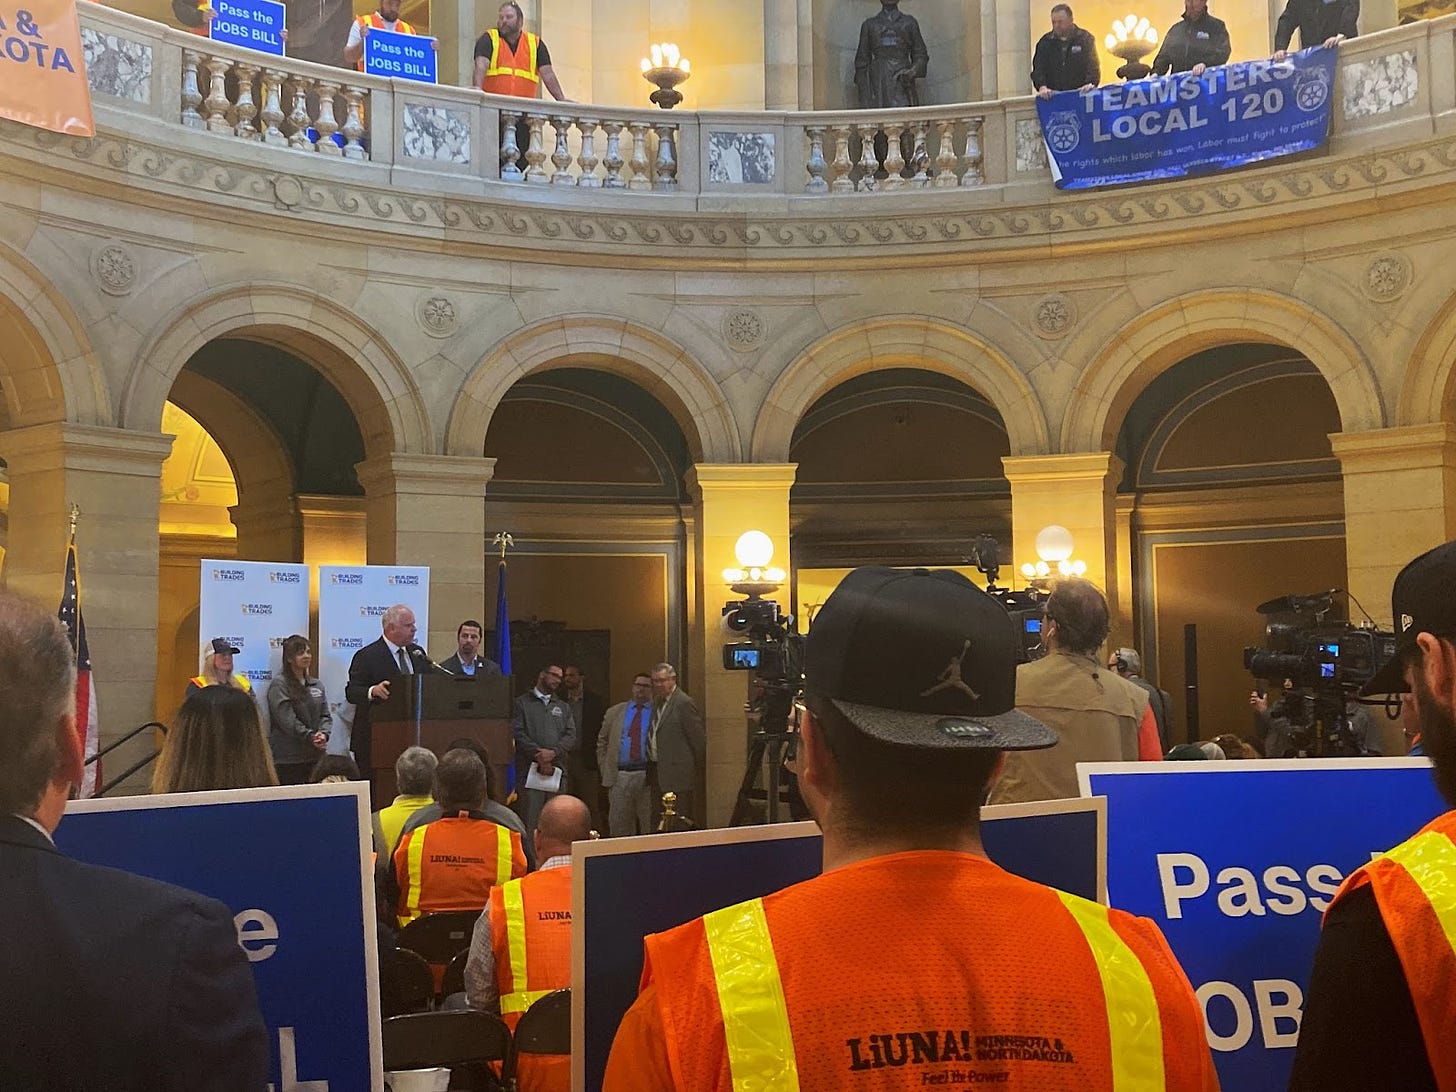 in the state capitol rotunda, governor walz stands at the podium in a suit, addressing a crowd of people wearing neon orange construction vests